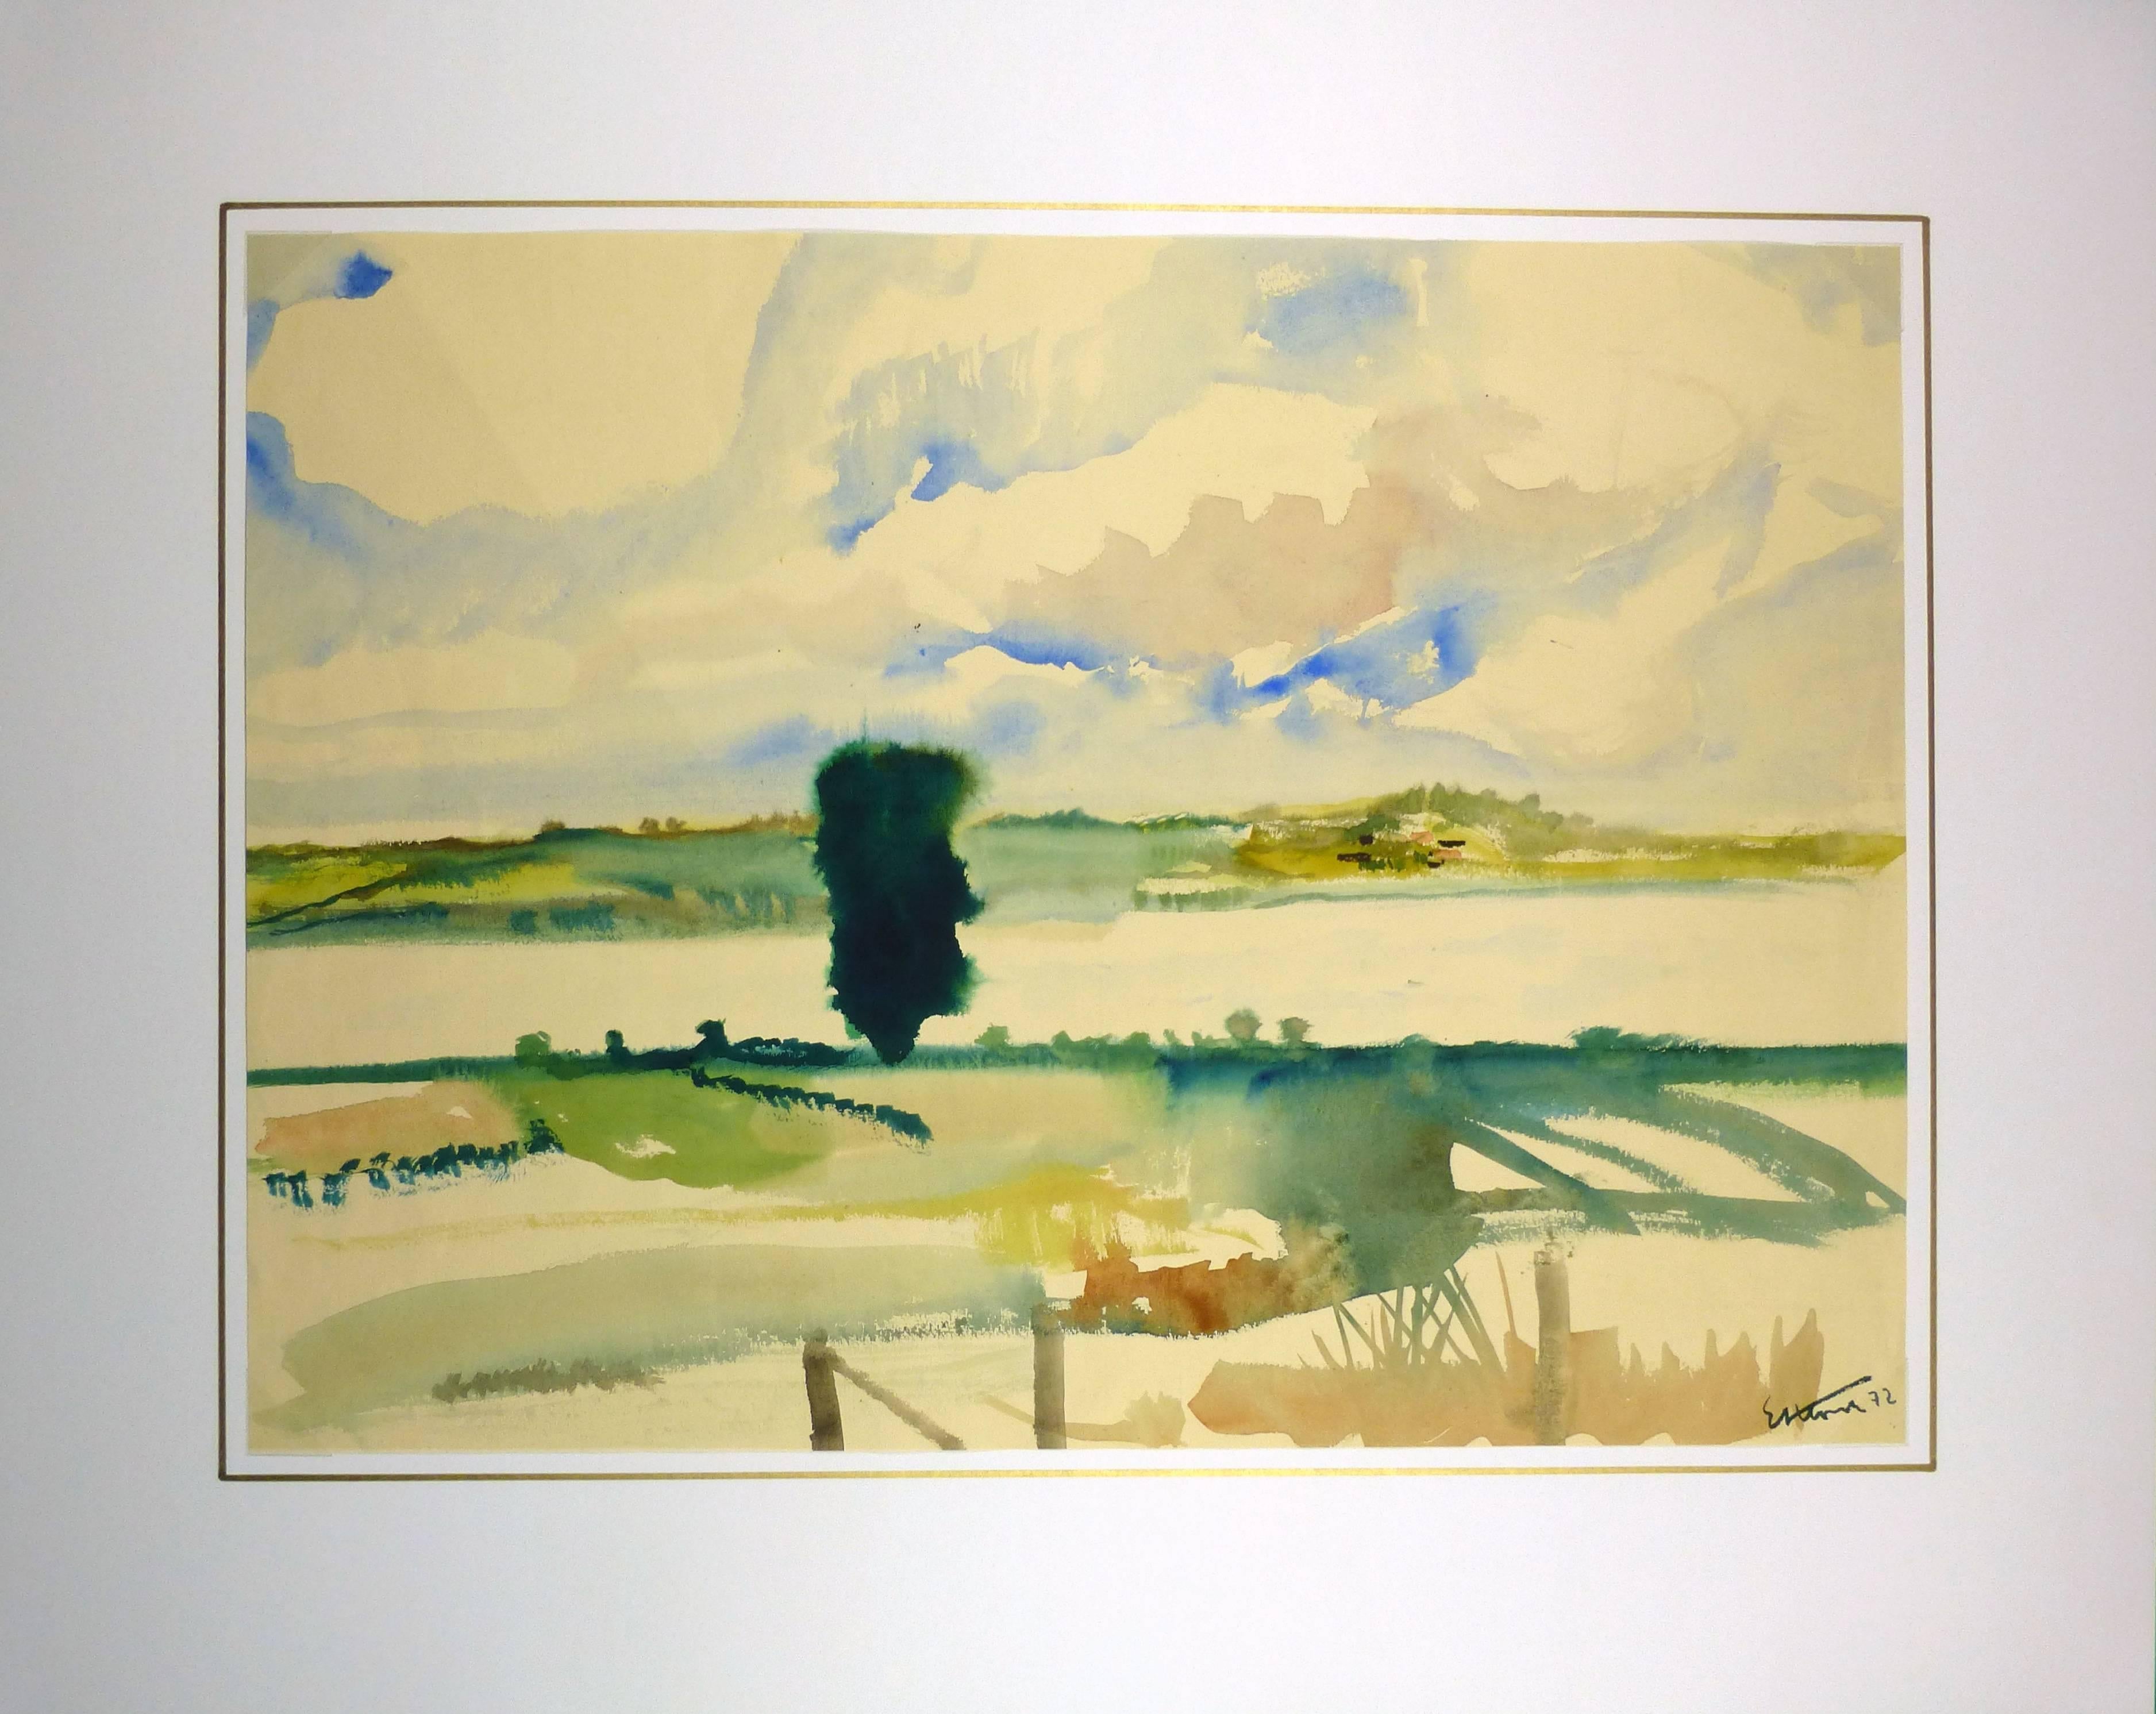 Peaceful watercolor of French pasture scene, 1972. Signed lower right.  

Original artwork on paper displayed on a white mat with a gold border. Archival plastic sleeve and Certificate of Authenticity included. Artwork, 16.5